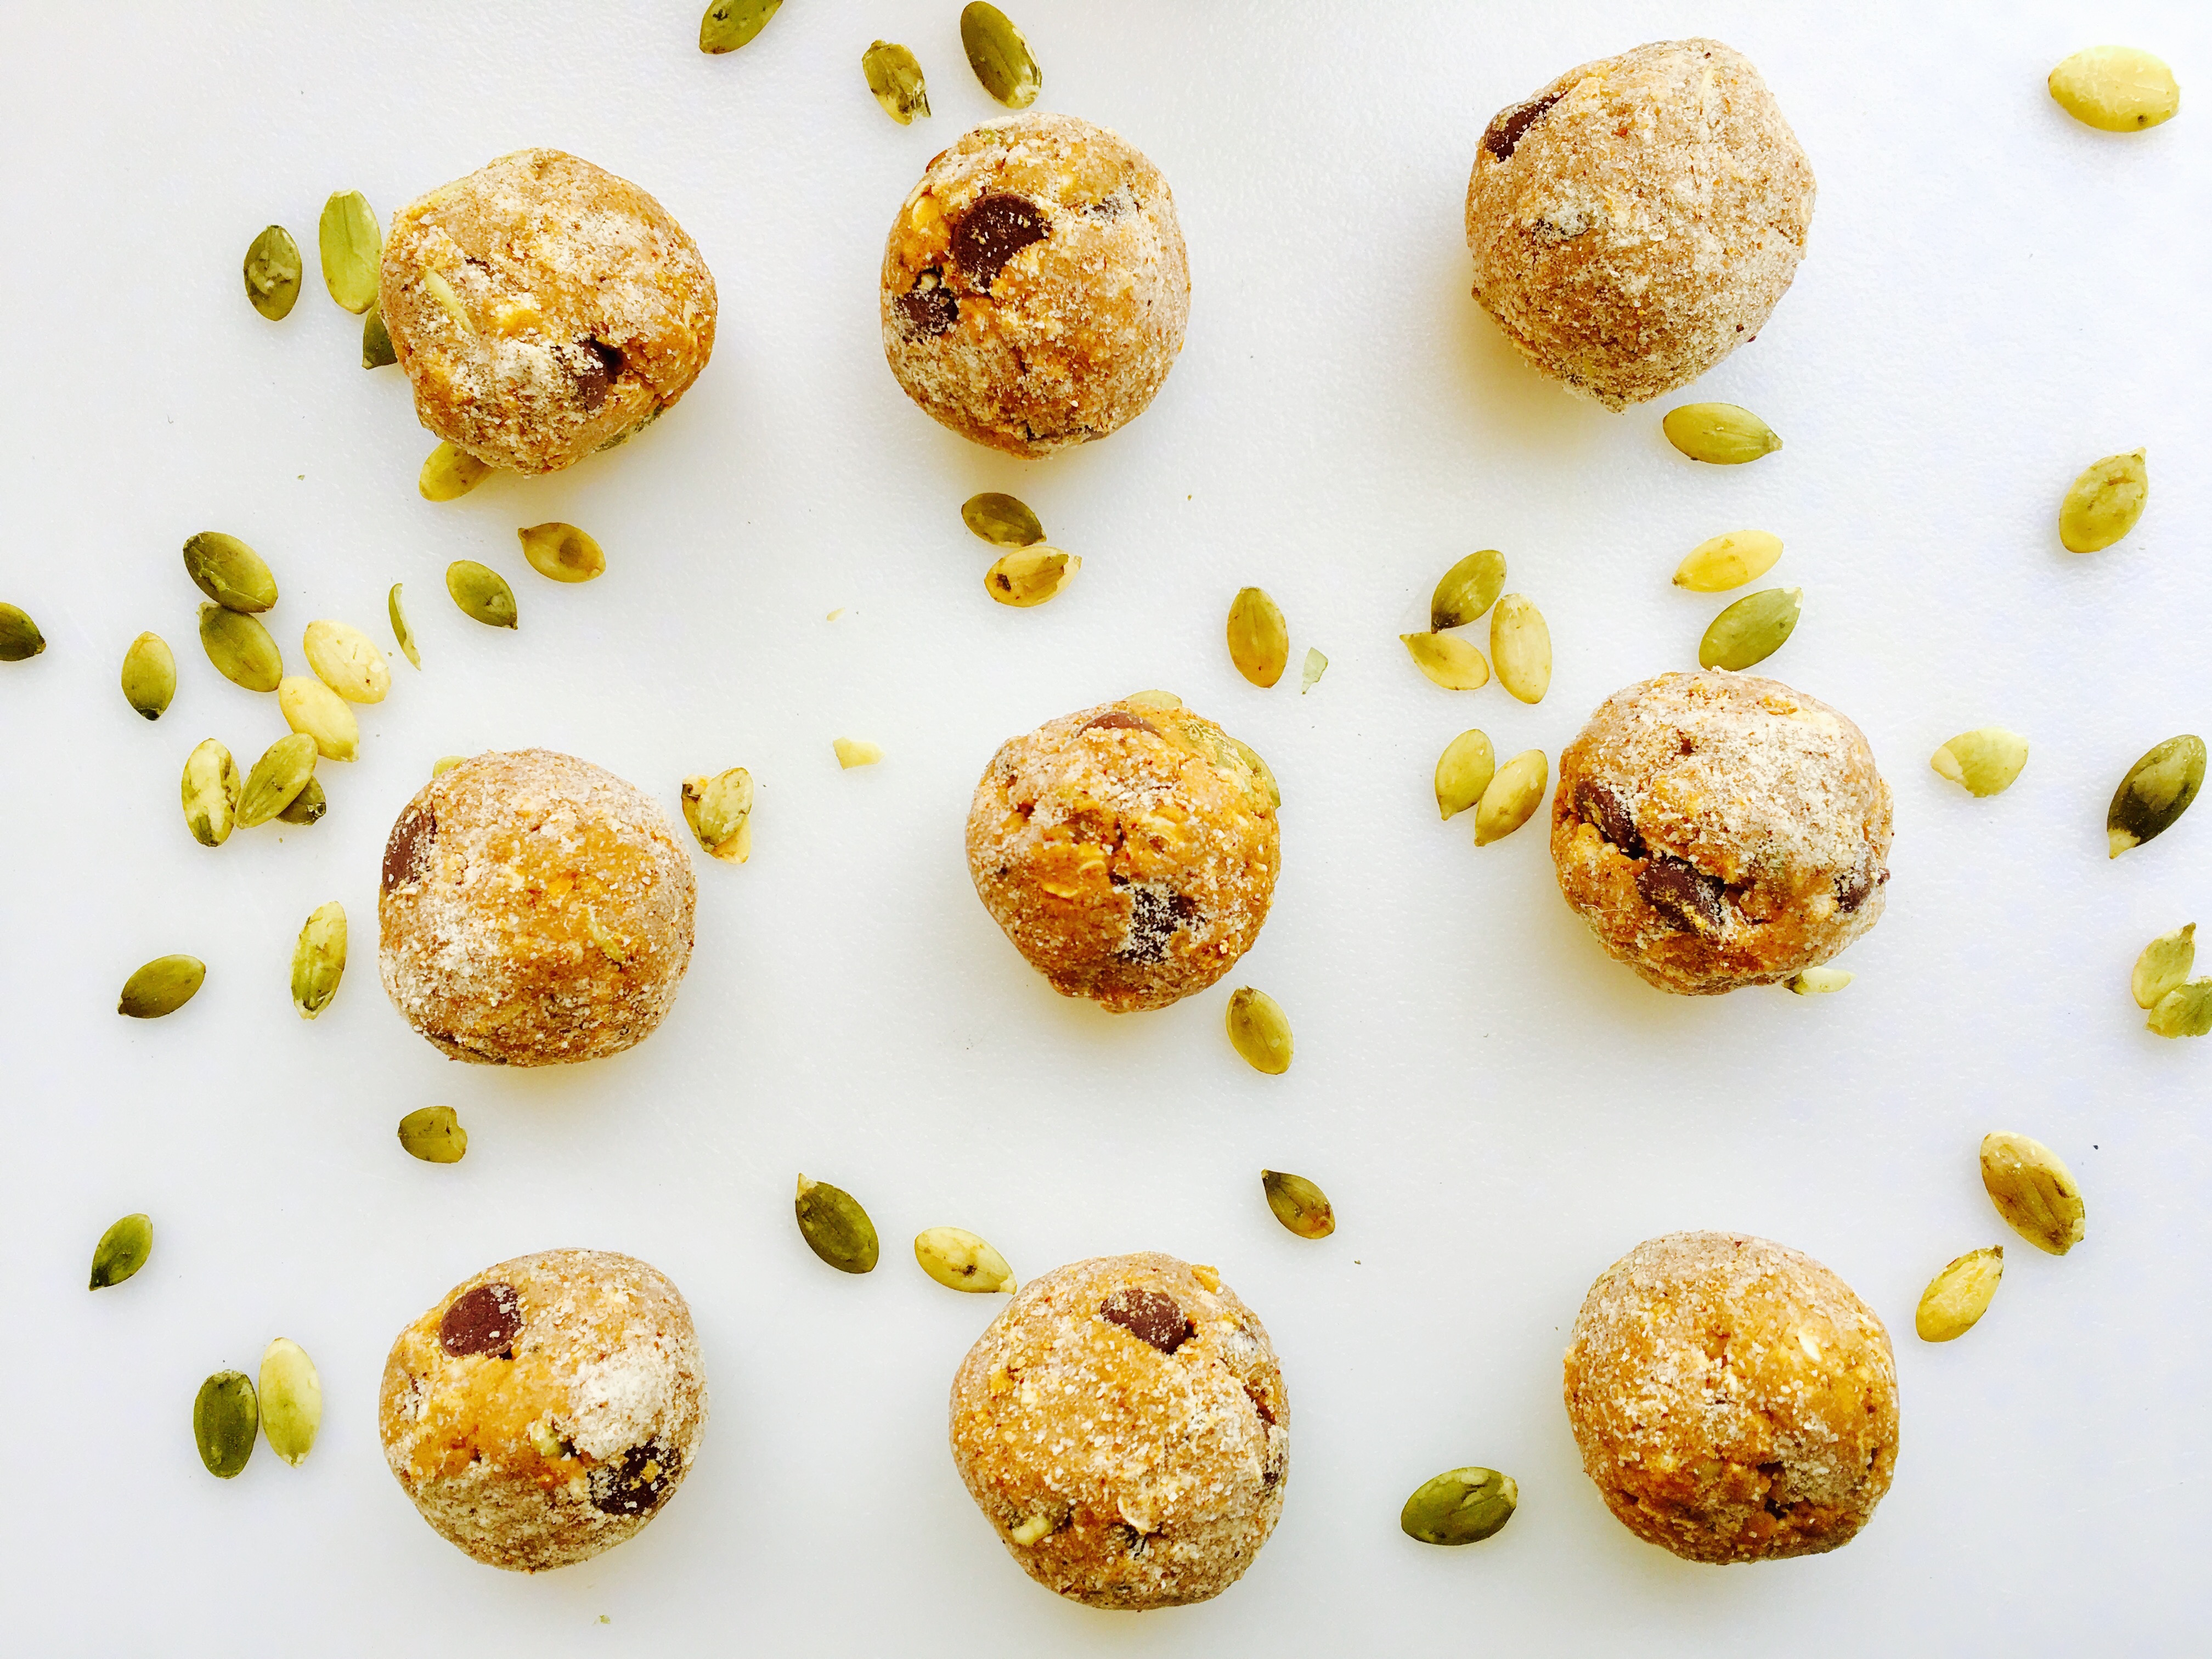 These Bourbon Pumpkin Protein Balls are a delicious snack or quick dessert! They feel like a treat, but this vegan recipe offers a healthy dose of protein and fiber that you can feel good about!